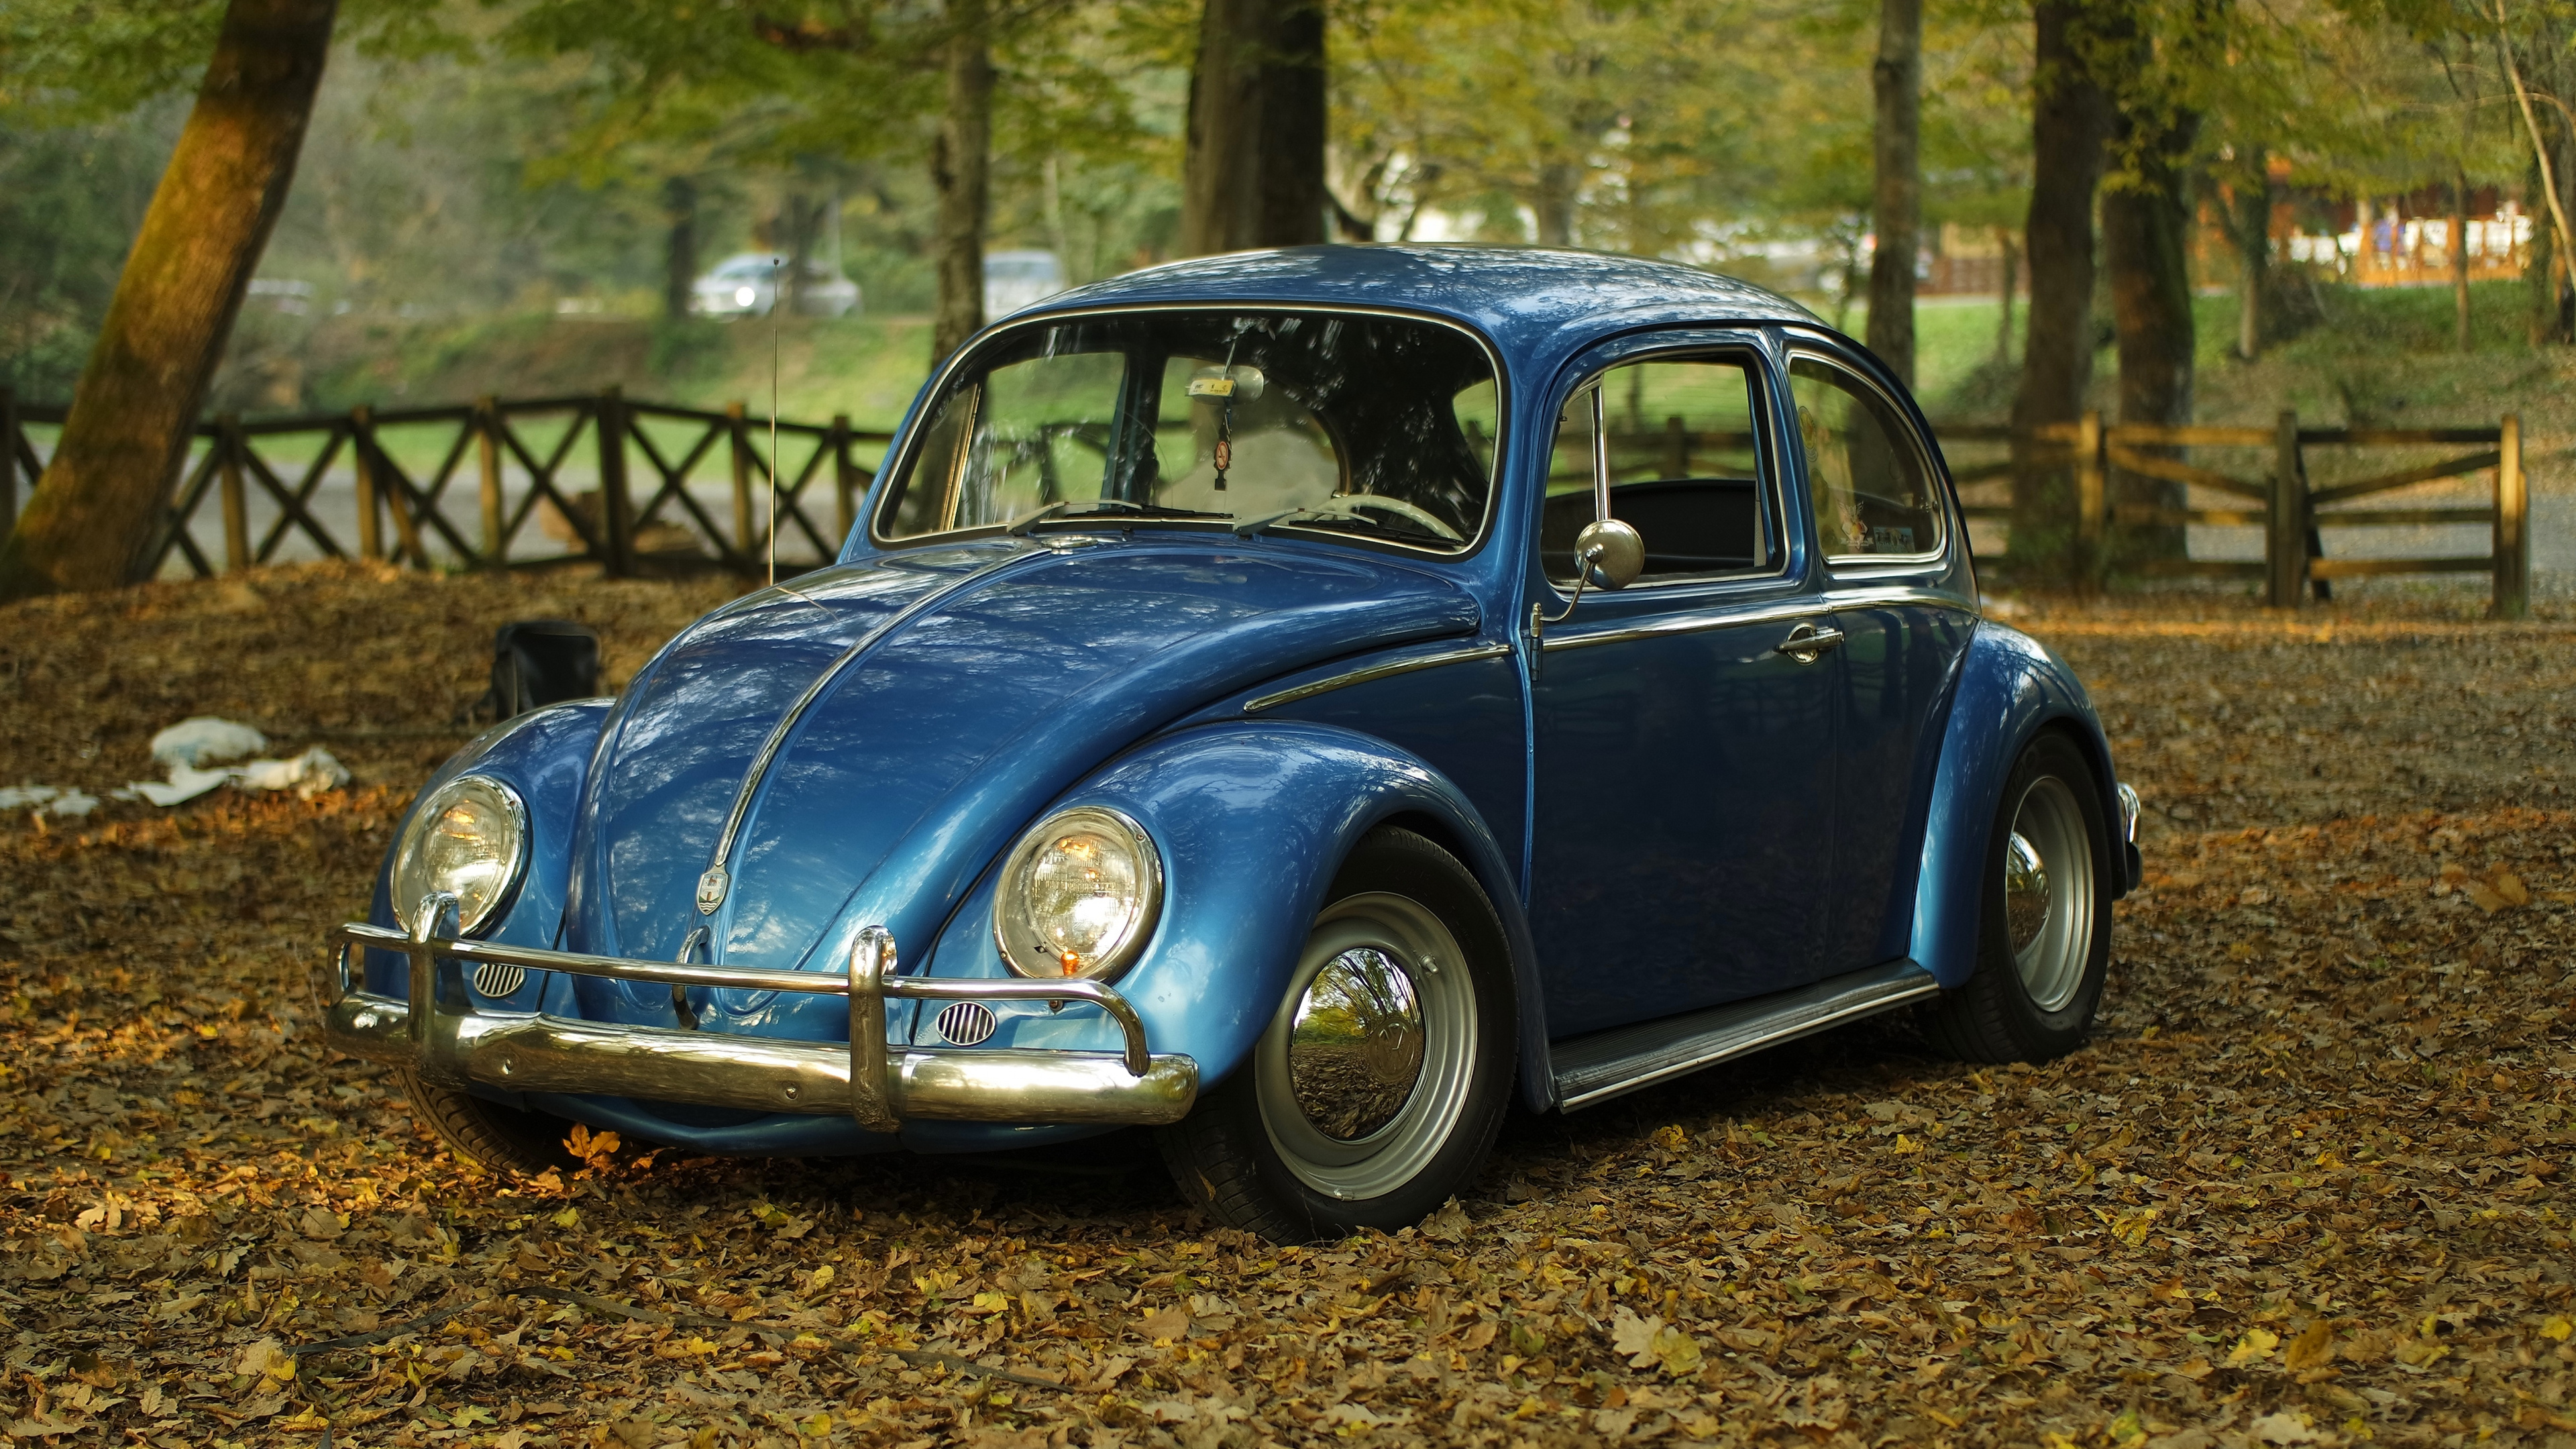 Blue Volkswagen Beetle on Brown Dried Leaves During Daytime. Wallpaper in 3840x2160 Resolution